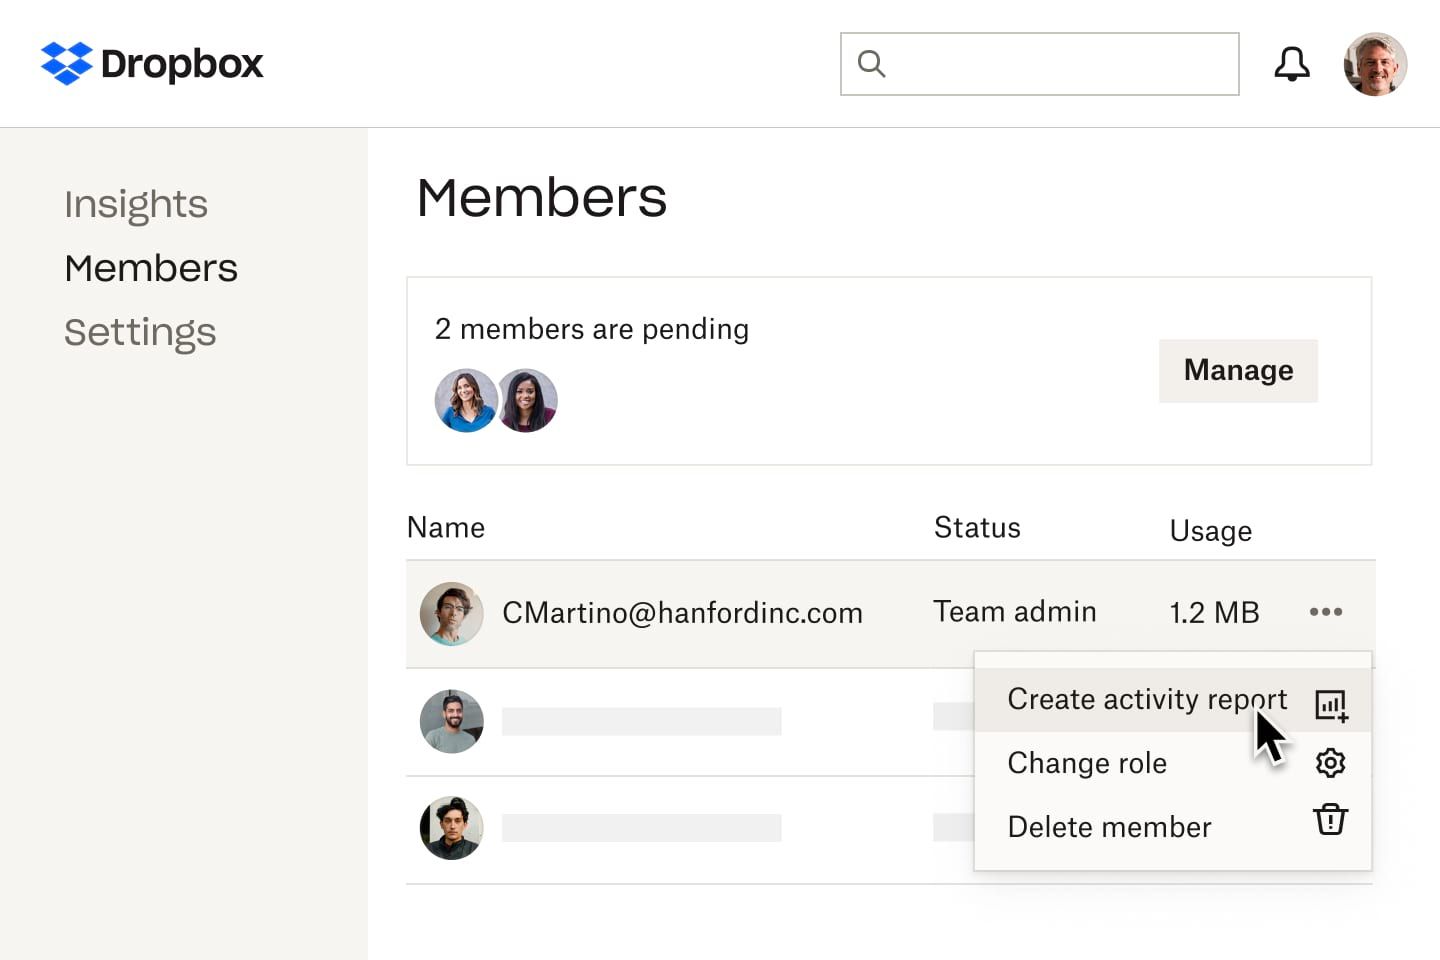 A dropdown menu in the Members list view that displays the options of creating an activity report, changing a member’s role, or deleting a member